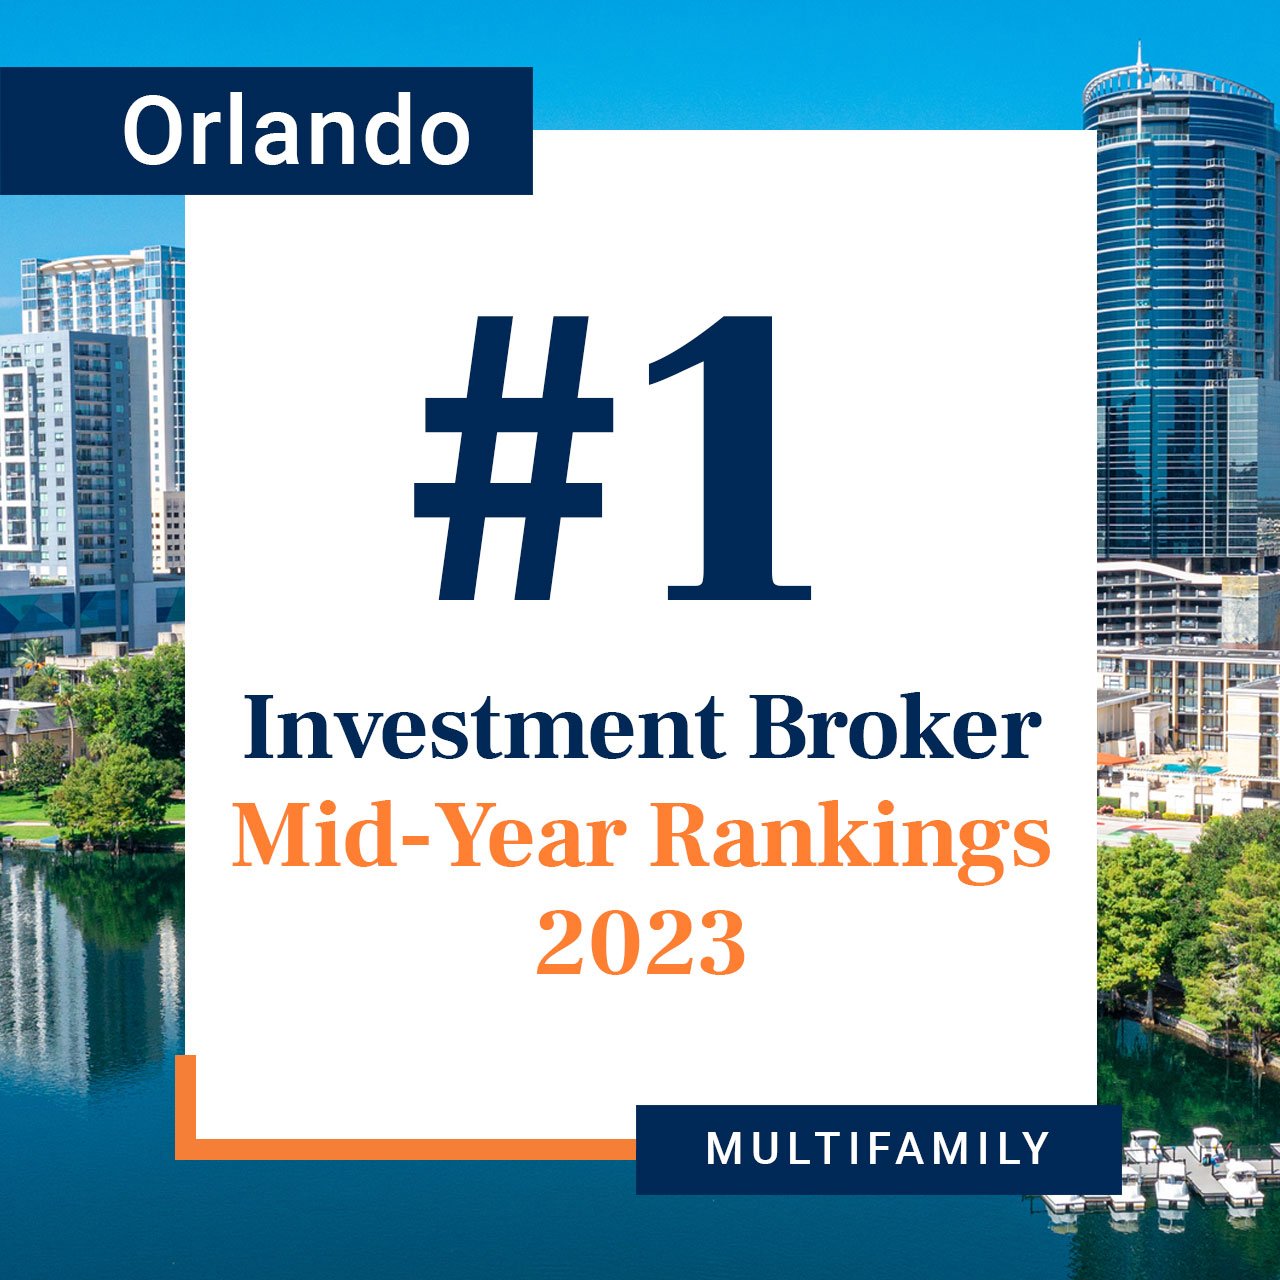 Top Multifamily Investment Broker - Mid Year Rankings 2023